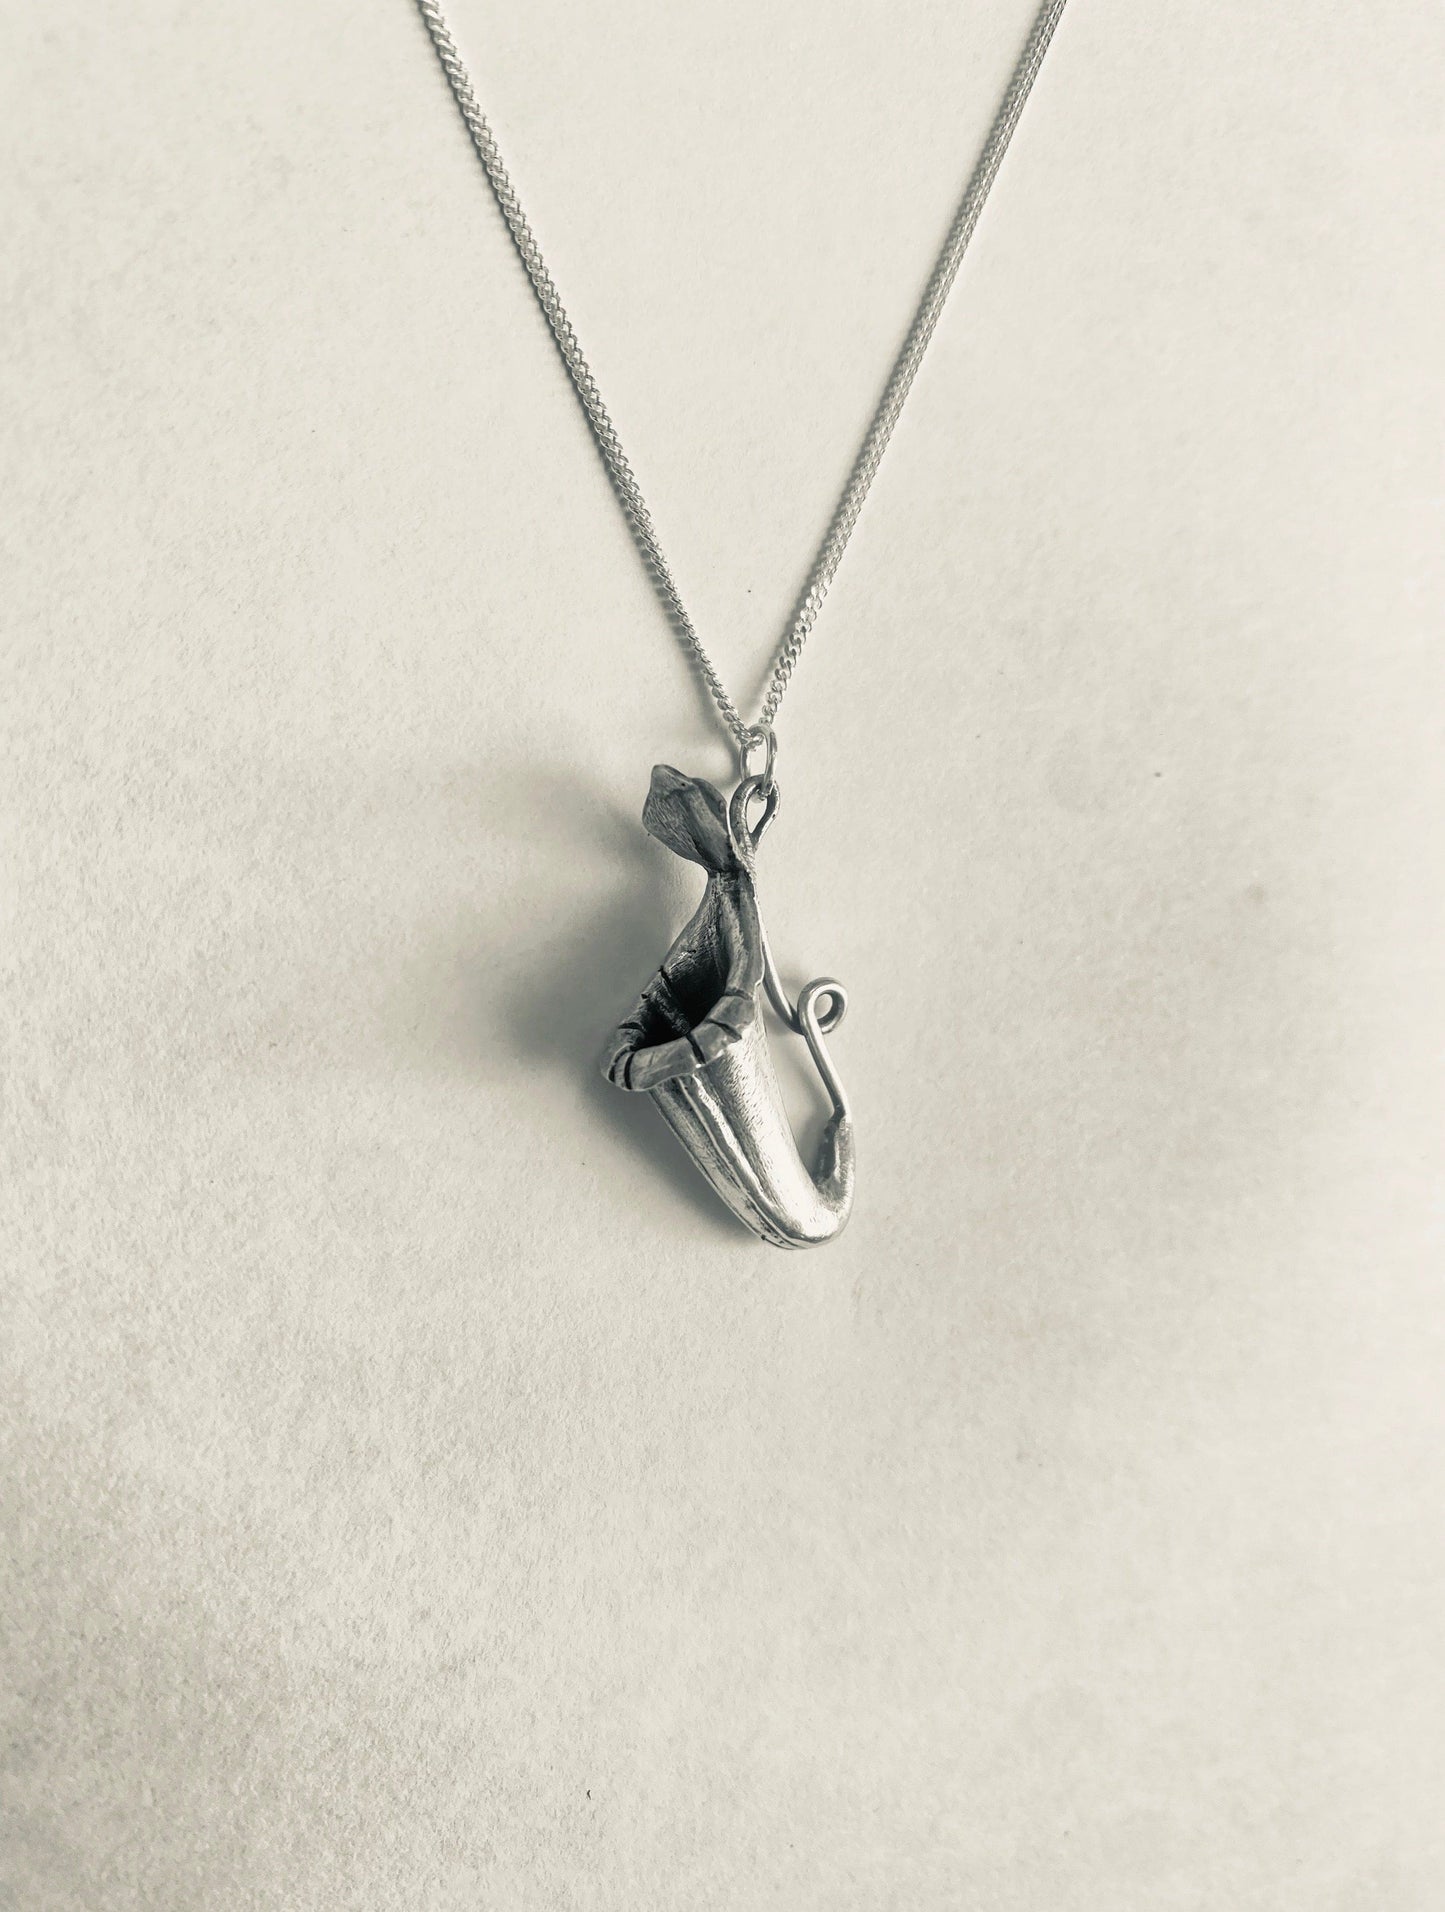 Nepenthes 'Pitcher Plant' Silver Pendant